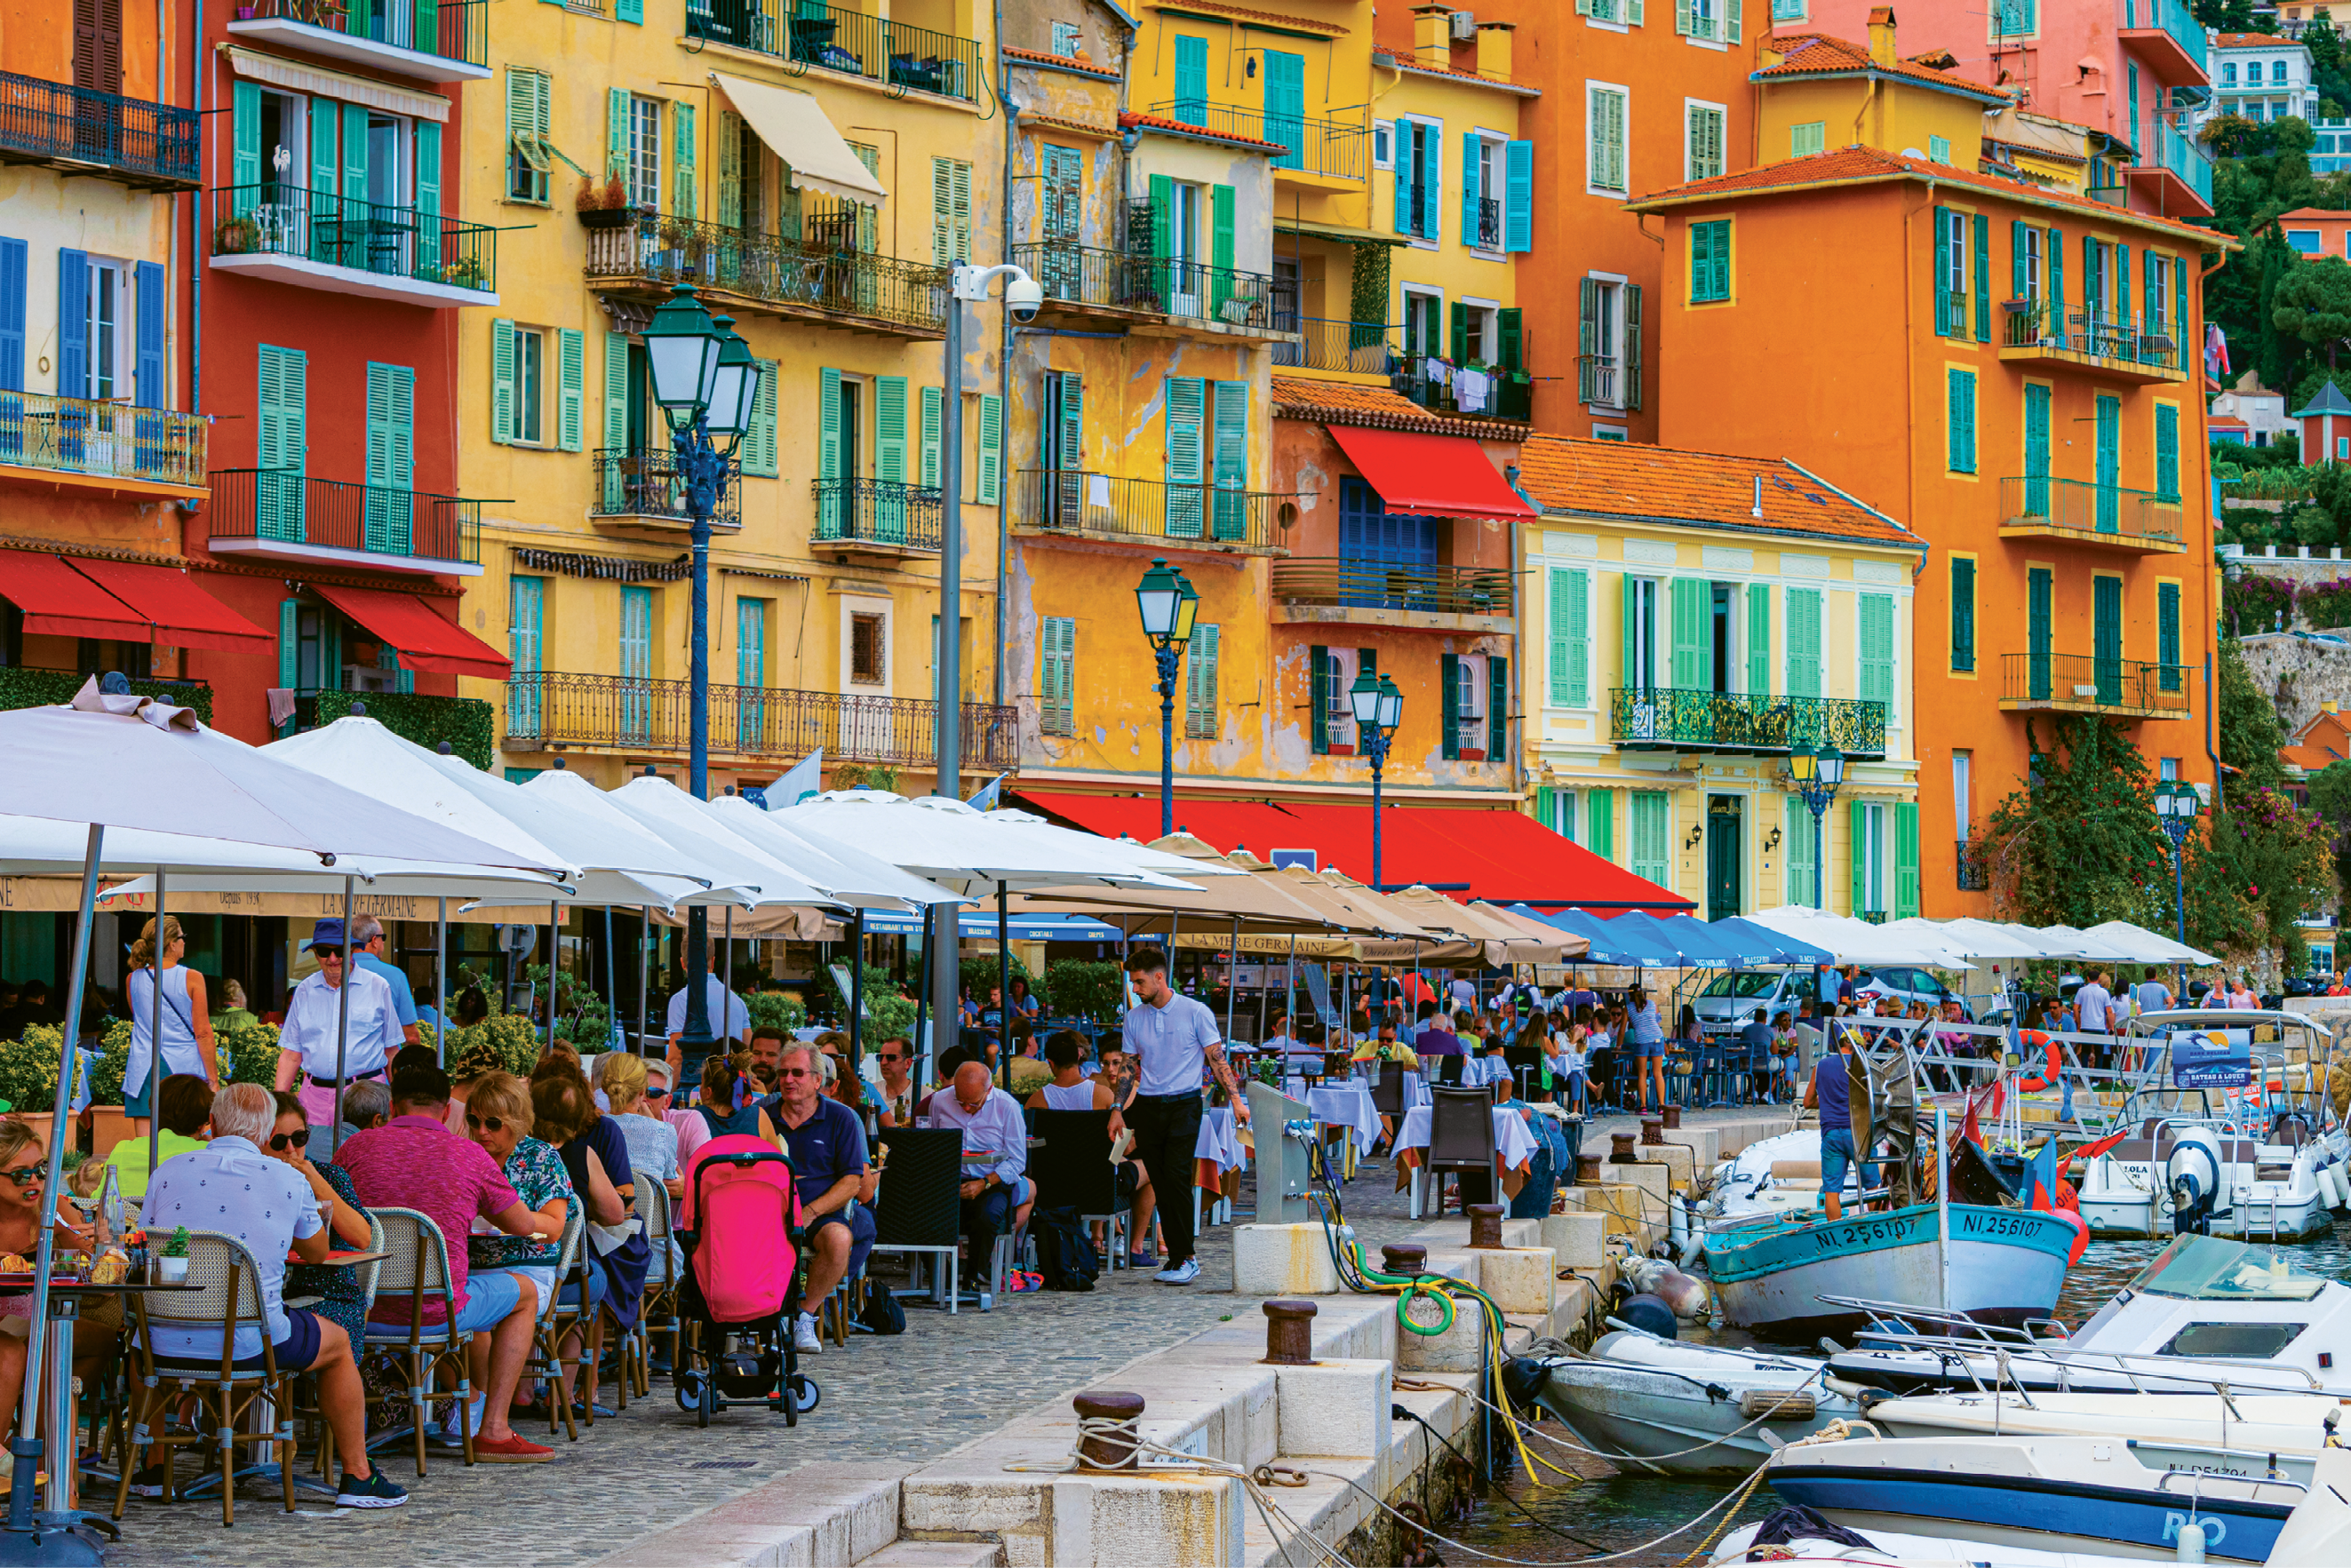 Basking in the seaside views of Villefranche-sur-Mer in all of its colorful glory